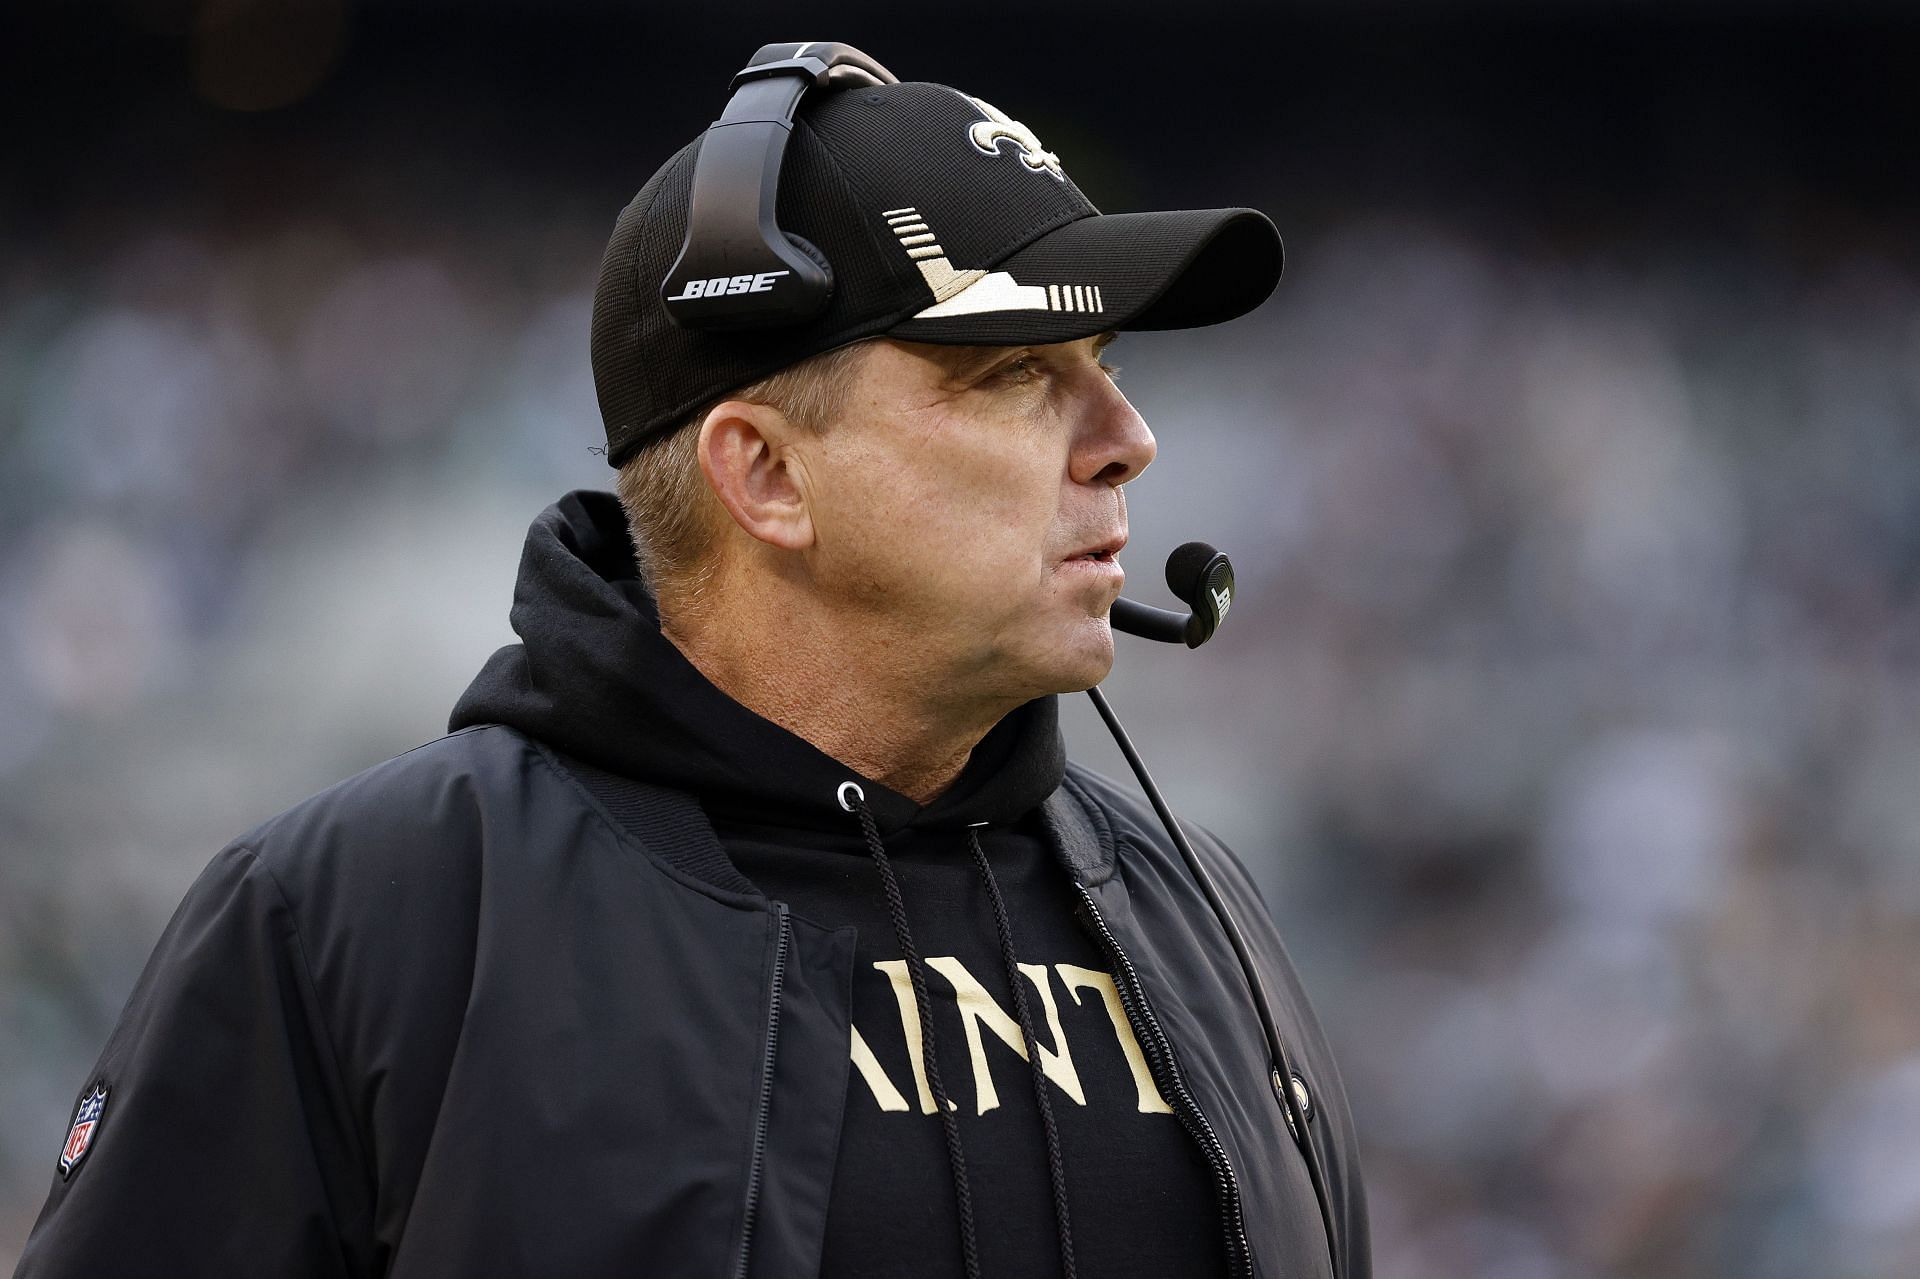 The Philadelphia Eagles will wear home jerseys in New Orleans because  Saints coach Sean Payton lost a golf bet, This is the Loop